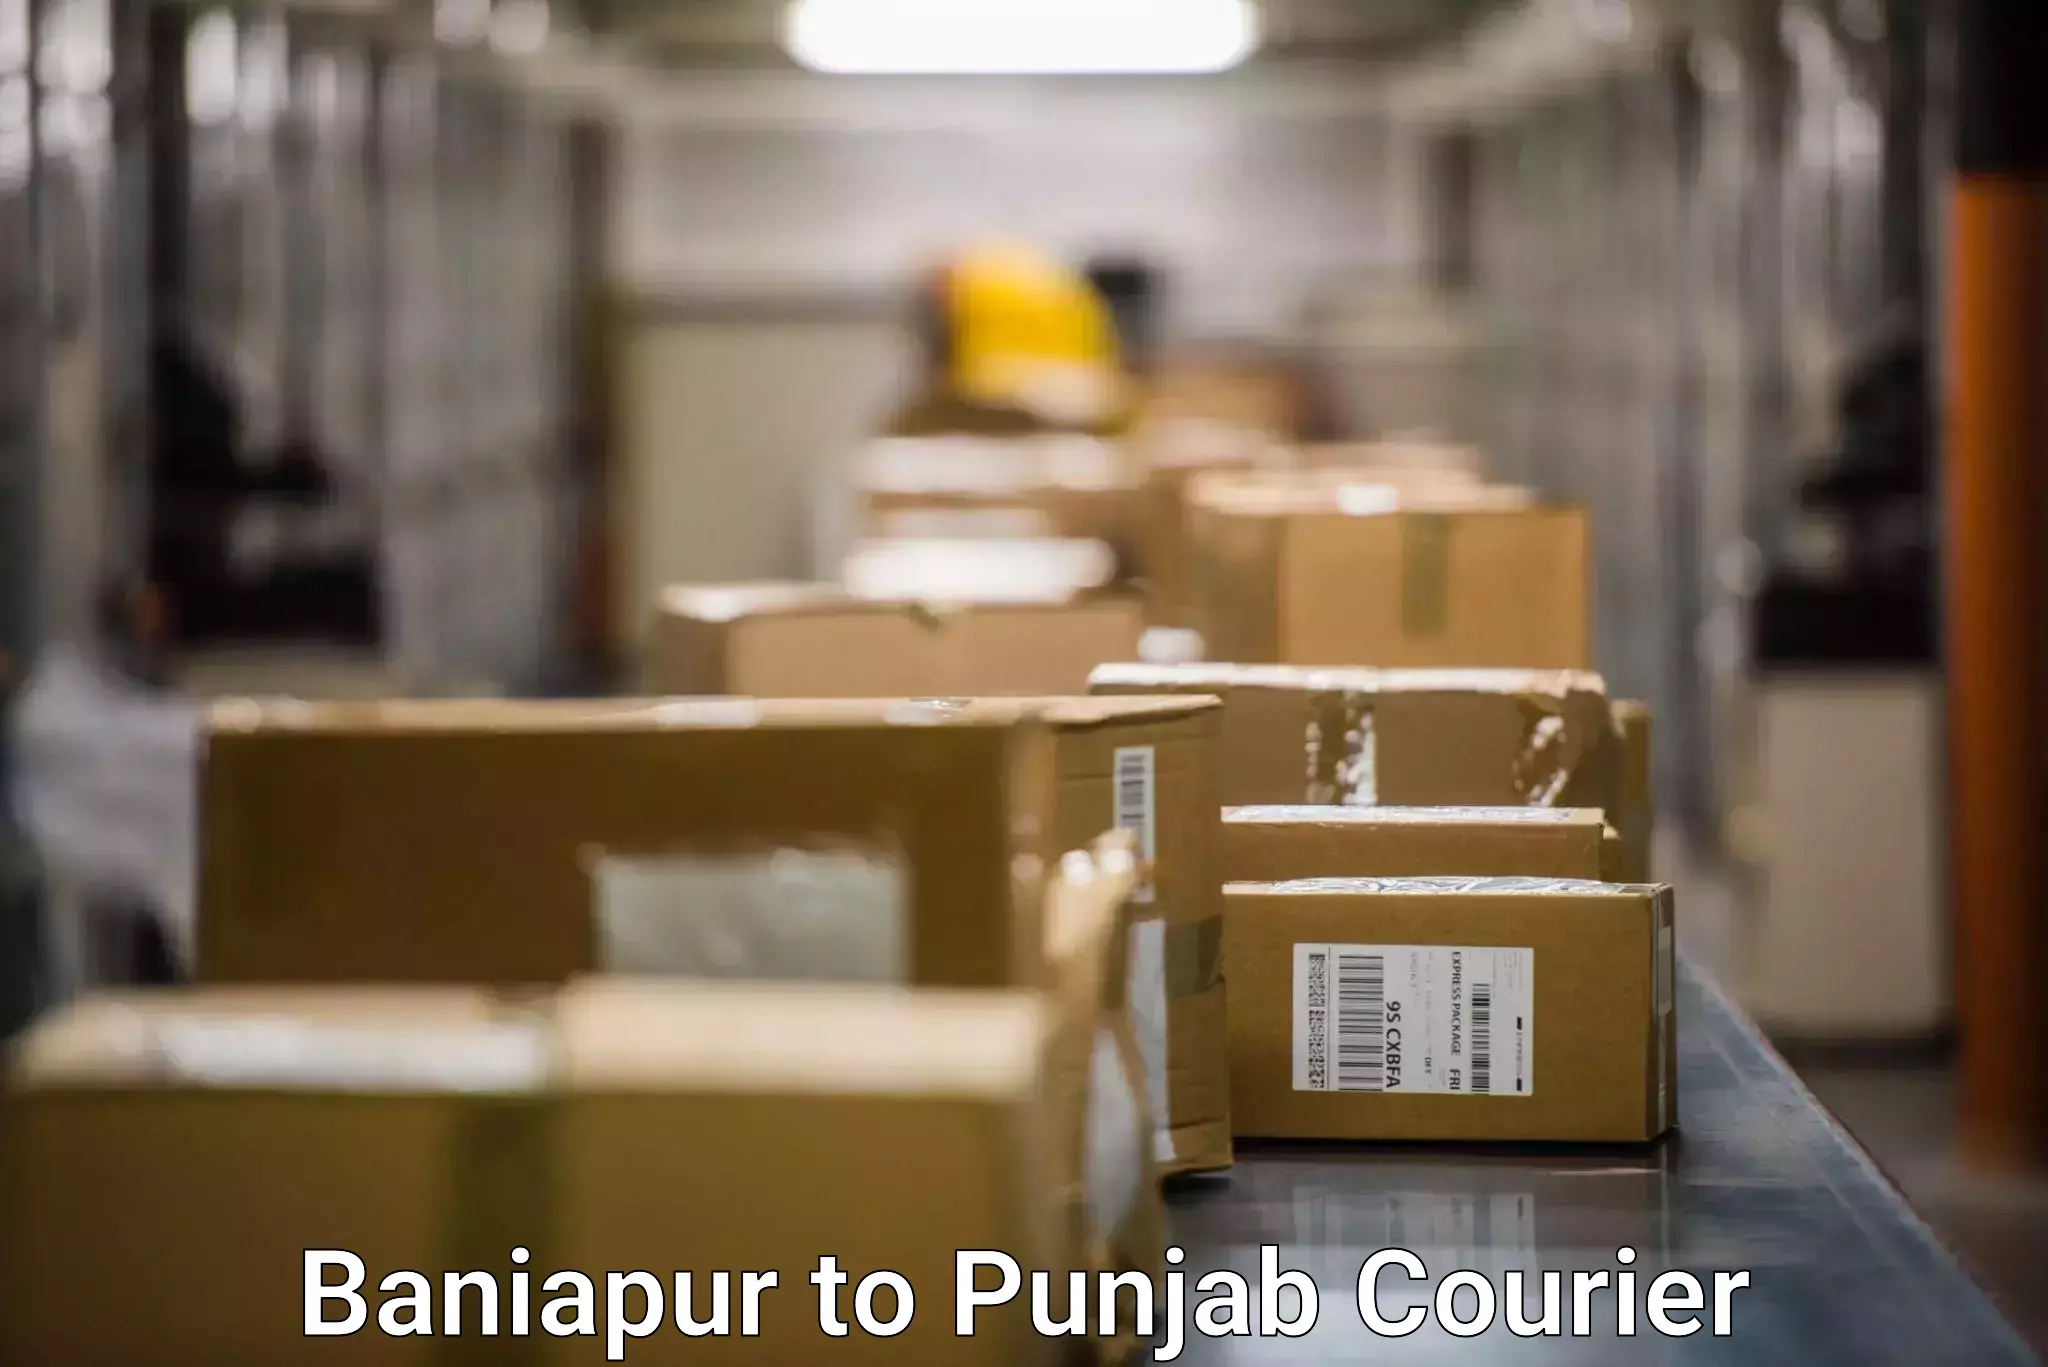 Next-day delivery options in Baniapur to Bathinda